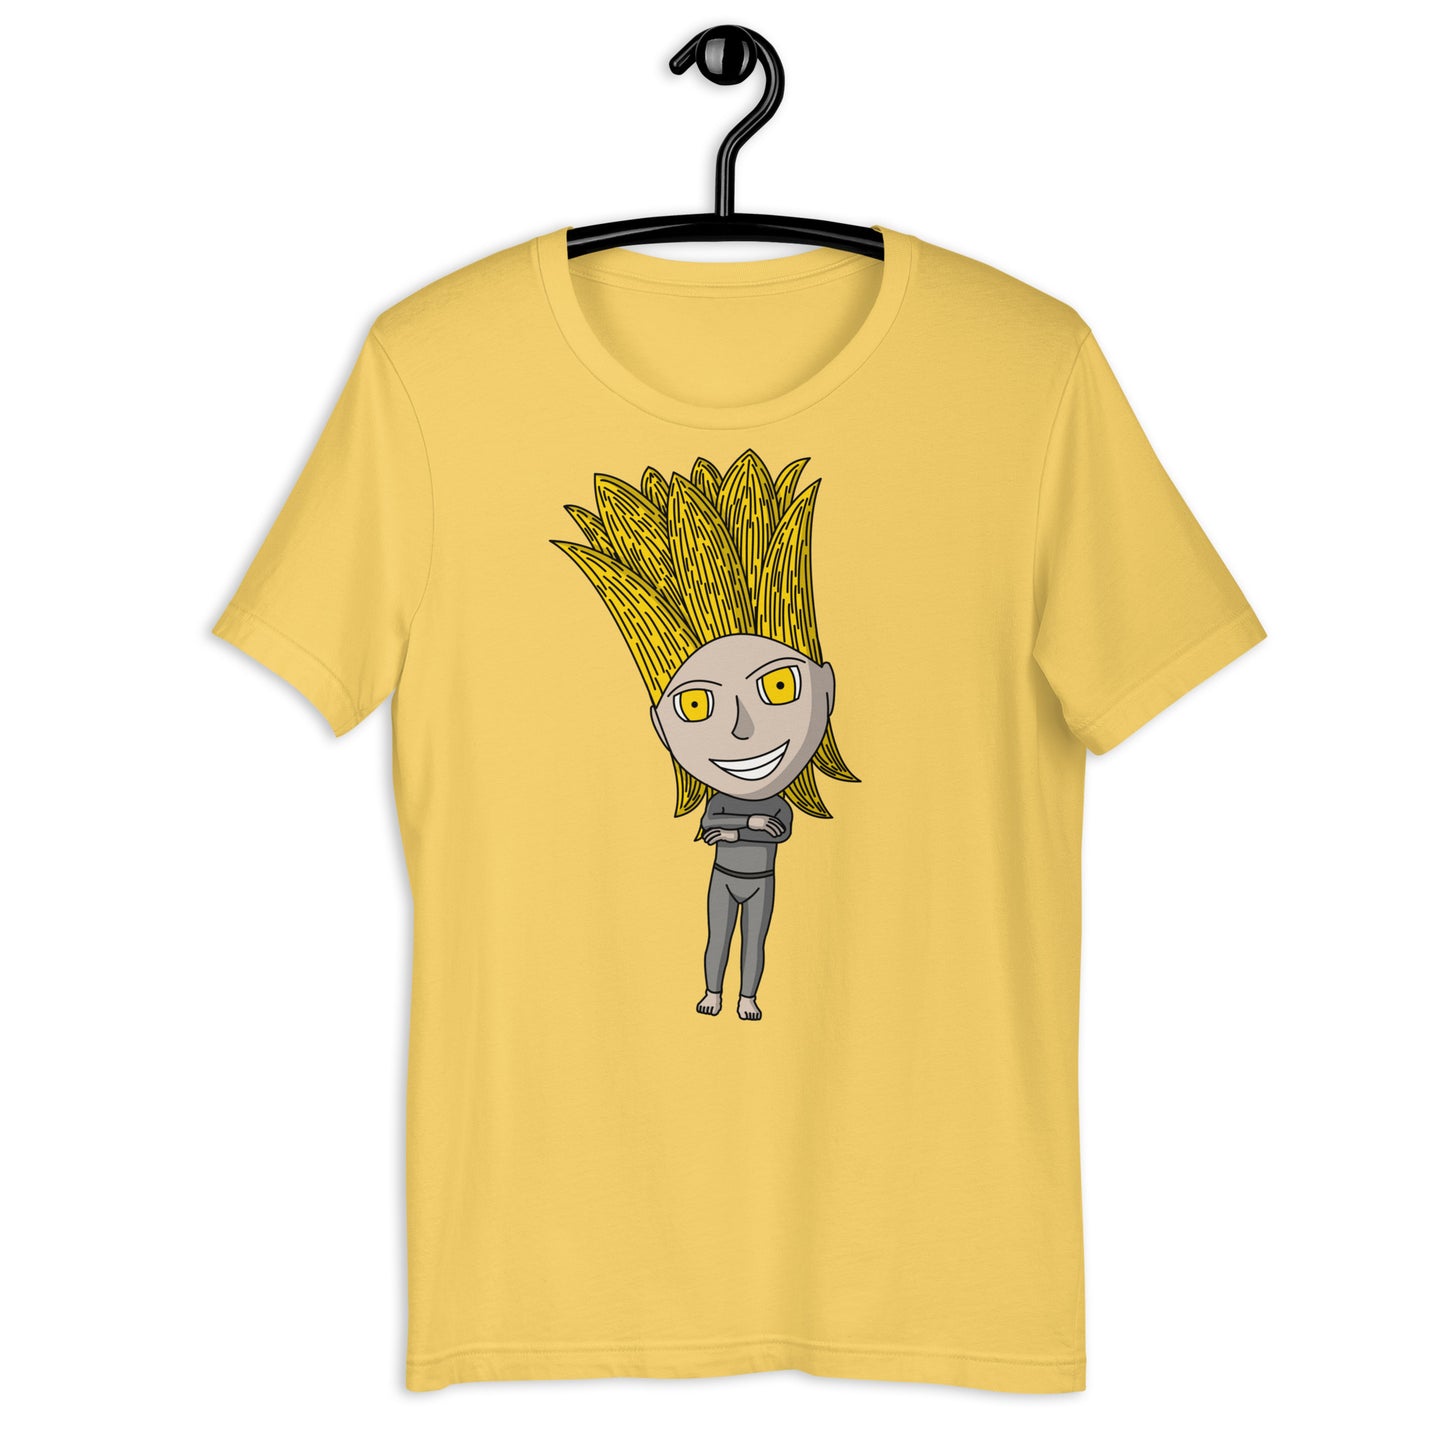 Light | Chibi character in anime style | T-shirt